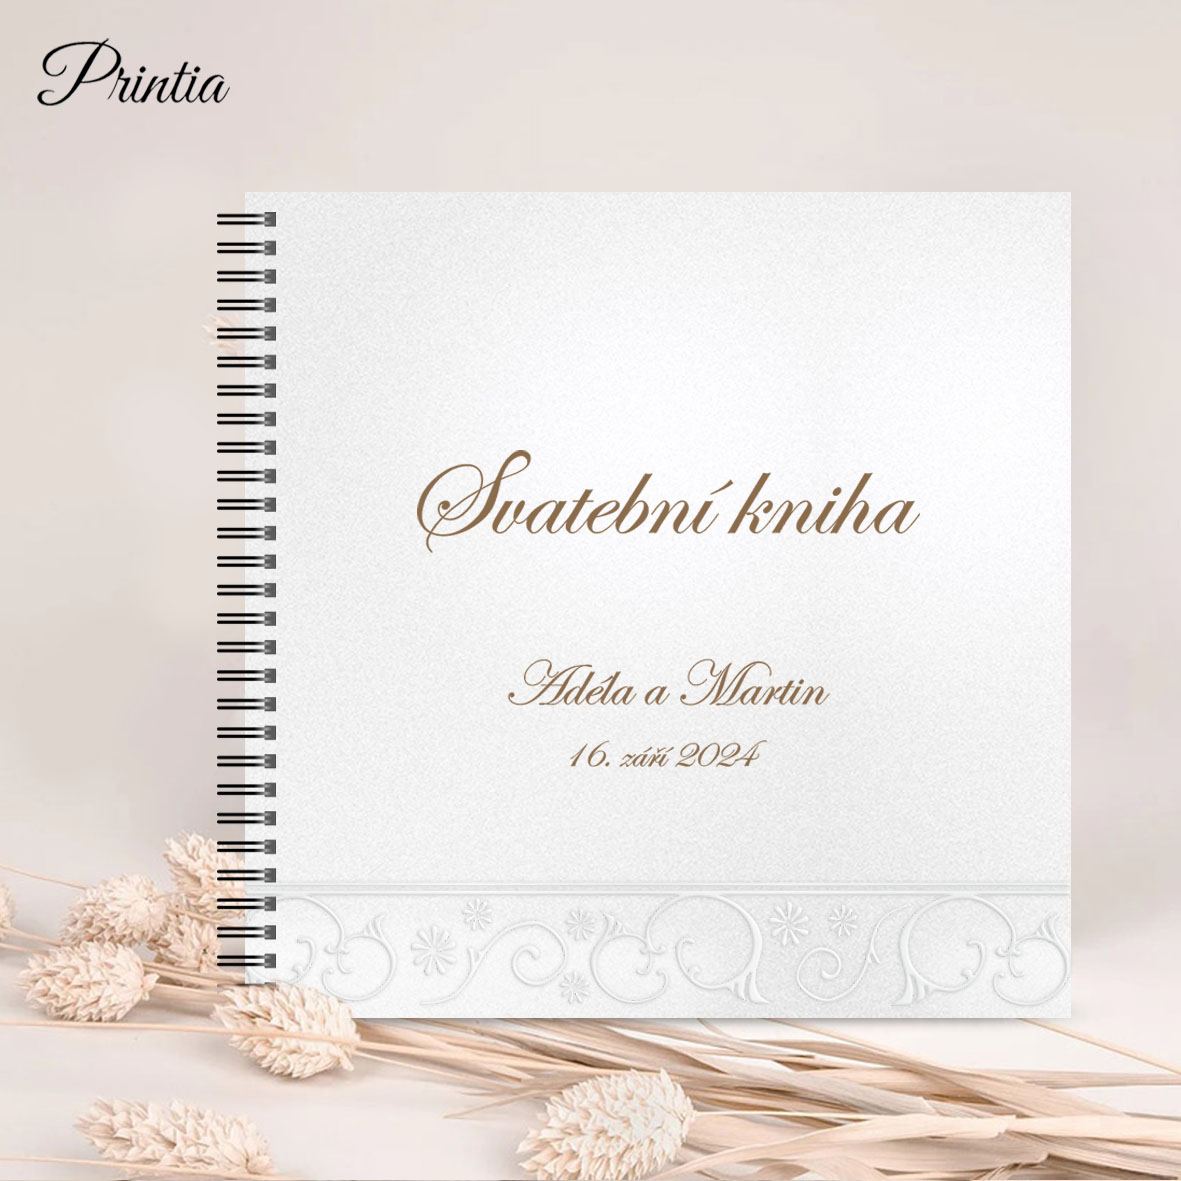 Wedding book with pearl ornament